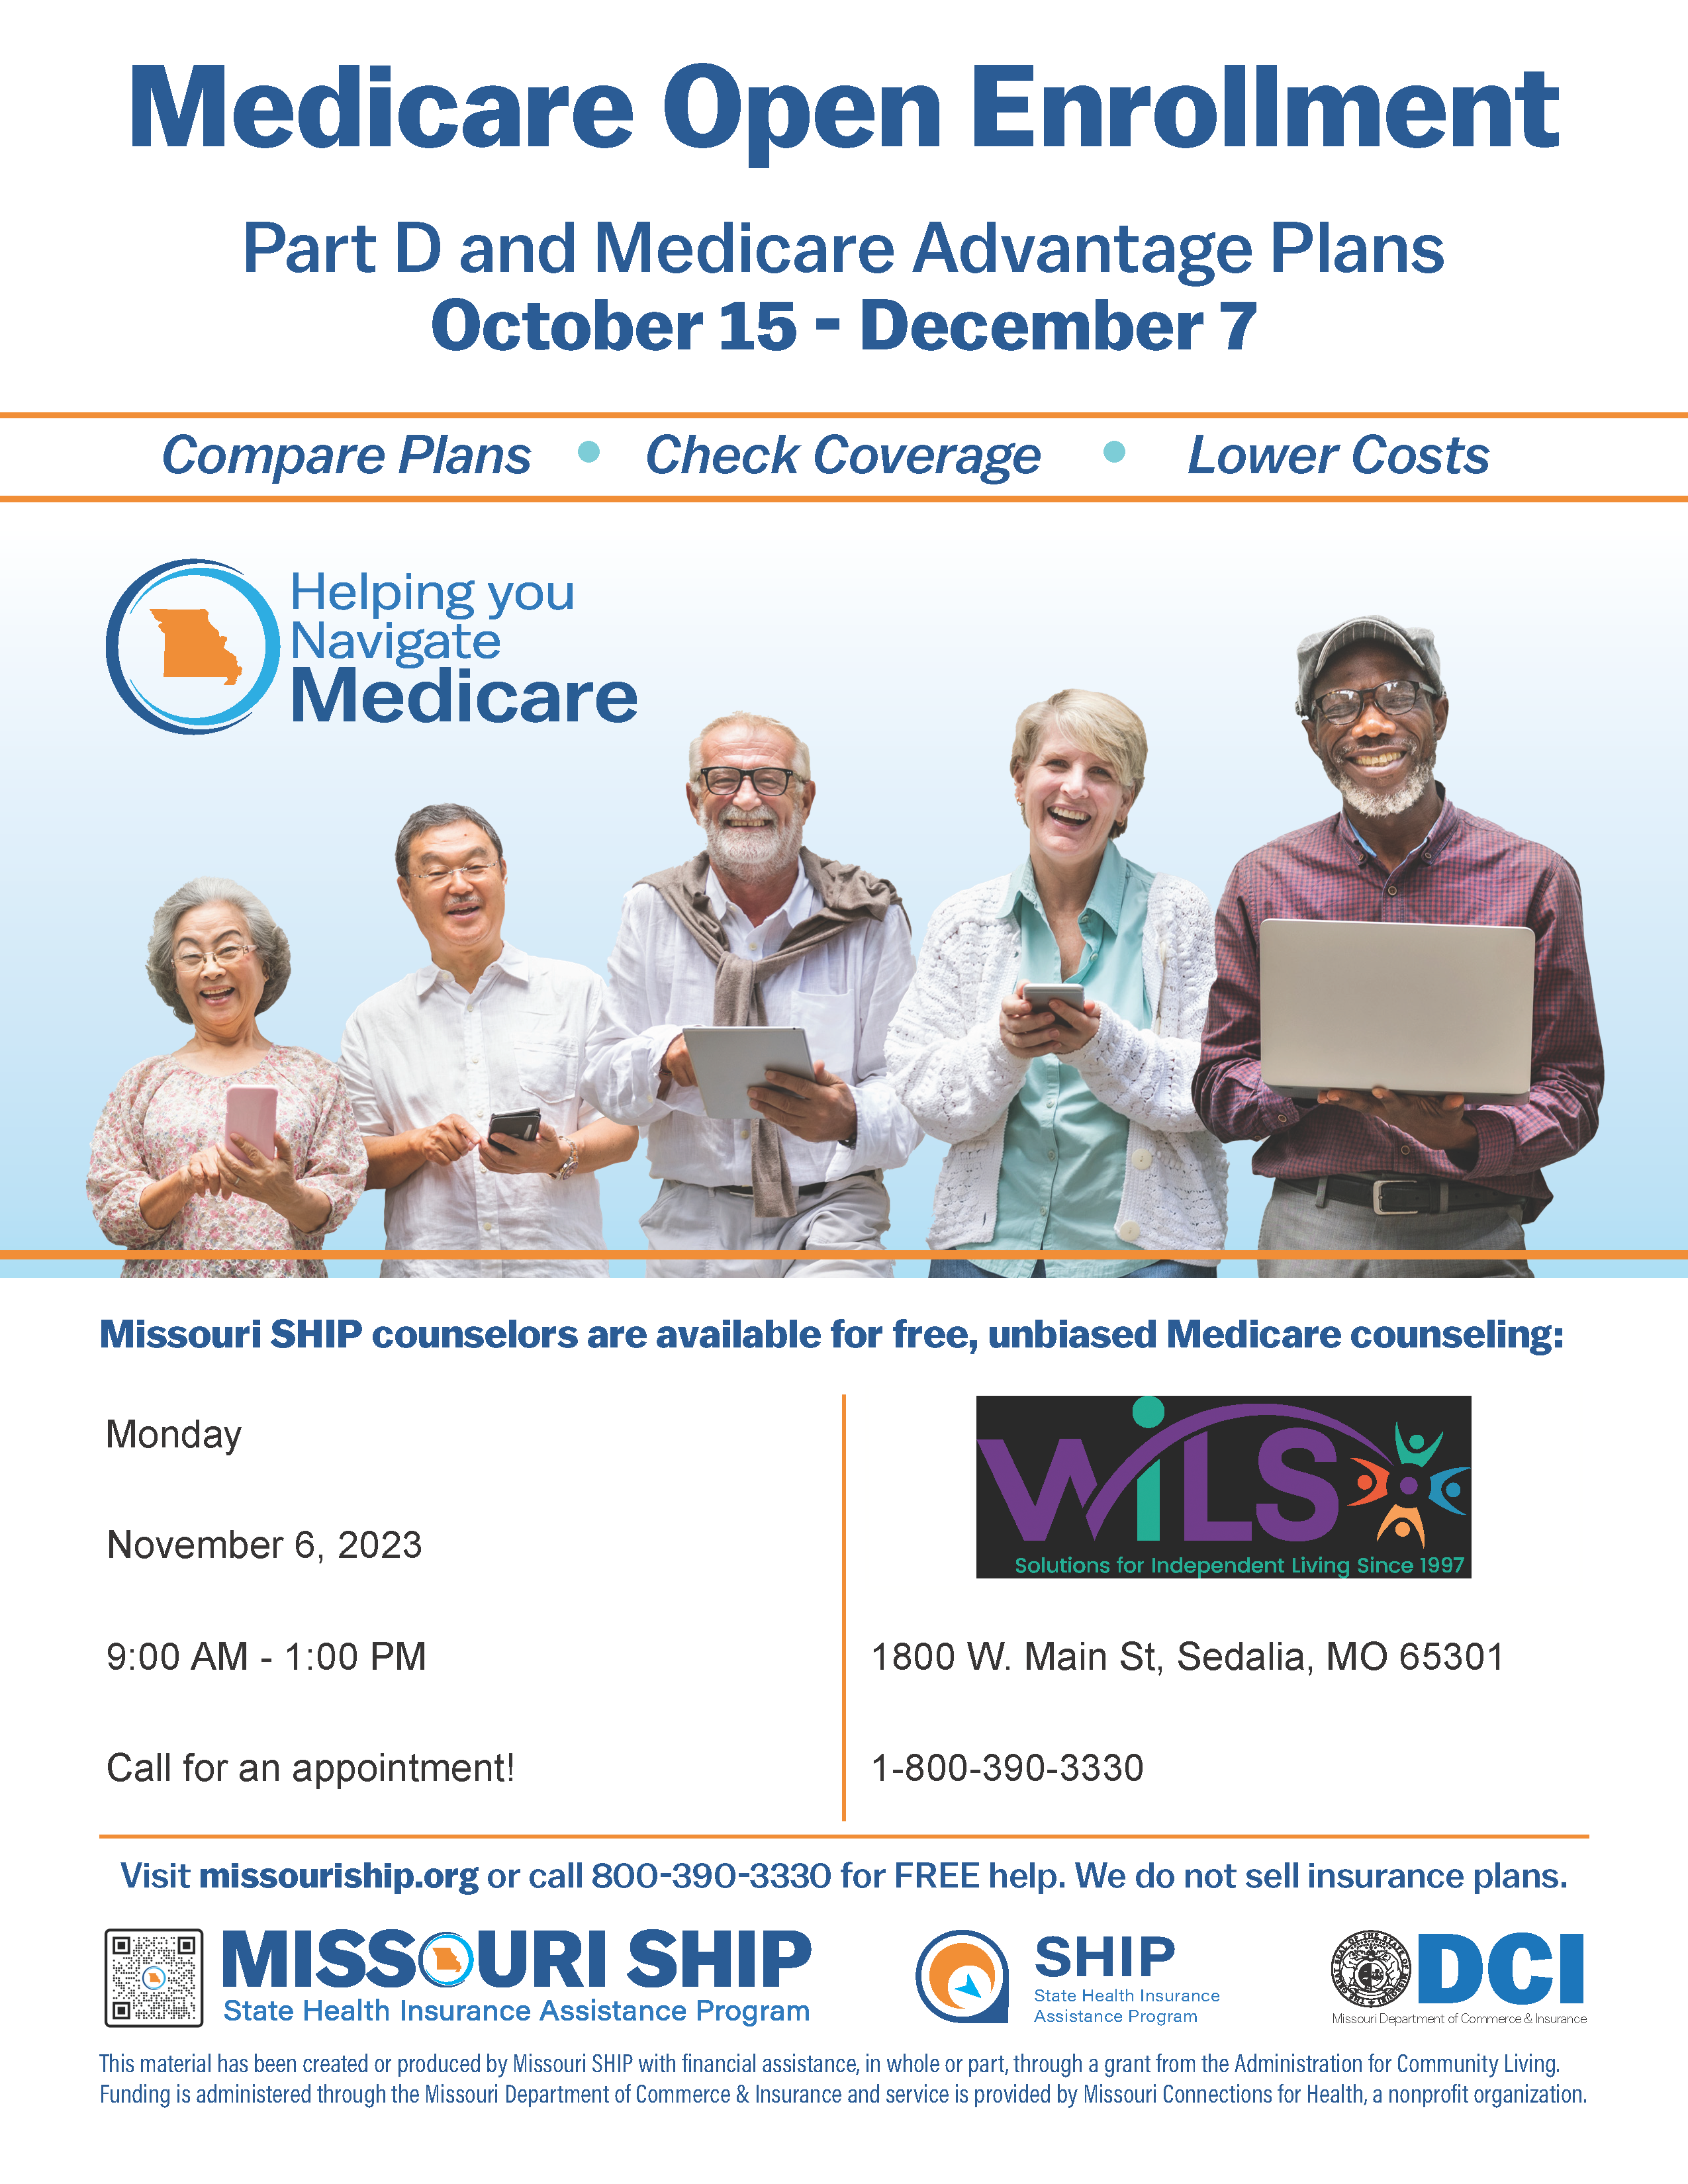 Medicare Open Enrollment Part D and Medicare Advantage Plans October 15 - December 7 Compare Plans • Check Coverage • Lower Costs Missouri SHIP counselors are available for free, unbiased Medicare counseling: Visit missouriship.org or call 800-390-3330 for FREE help. We do not sell insurance plans. This material has been created or produced by Missouri SHIP with financial assistance, in whole or part, through a grant from the Administration for Community Living. Funding is administered through the Missouri Department of Commerce & Insurance and service is provided by Missouri Connections for Health, a nonprofit organization. DCI Missouri Department of Commerce & Insurance Monday Nov 6, 2023 from 9am - 1pm by appointment only at 1800 W. Main St. in Sedalia. Call 800-390-3330